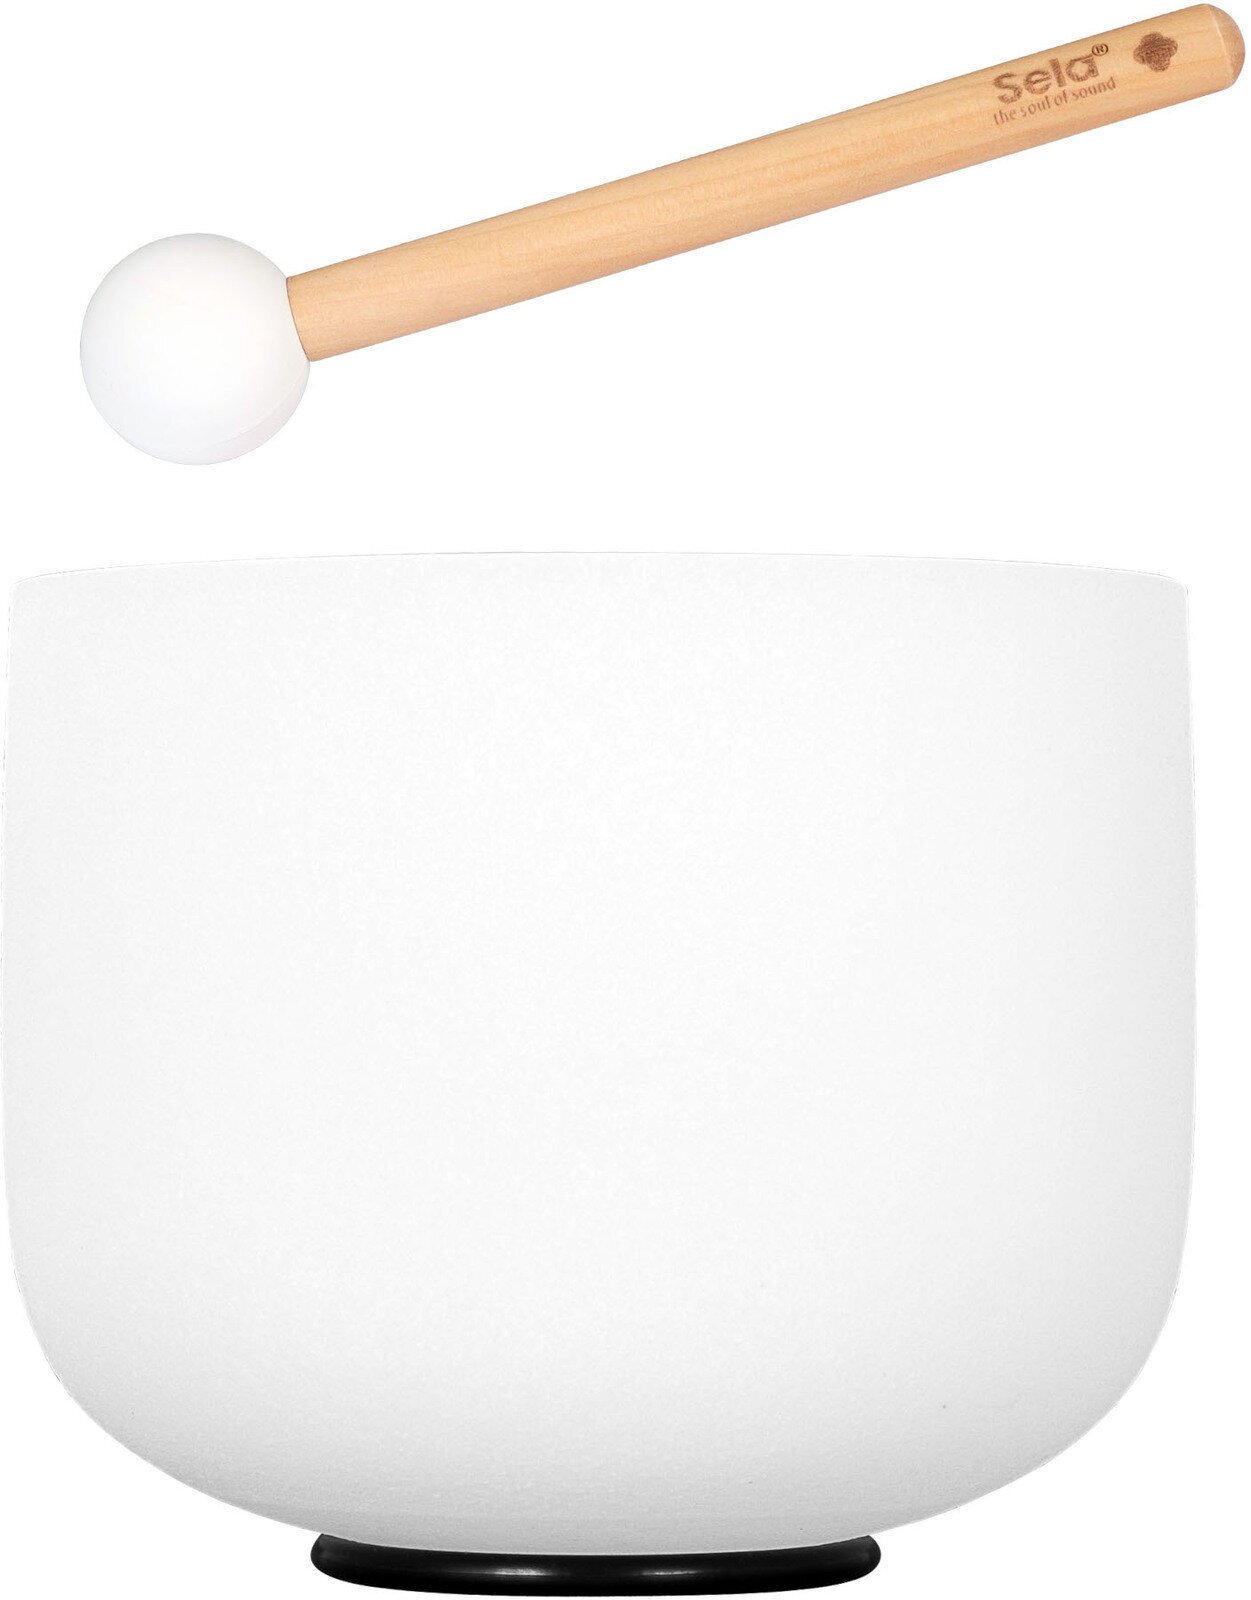 Percussion für Musiktherapie Sela 8" Crystal Singing Bowl Frosted 432 Hz G incl. 1 Wood Mallet